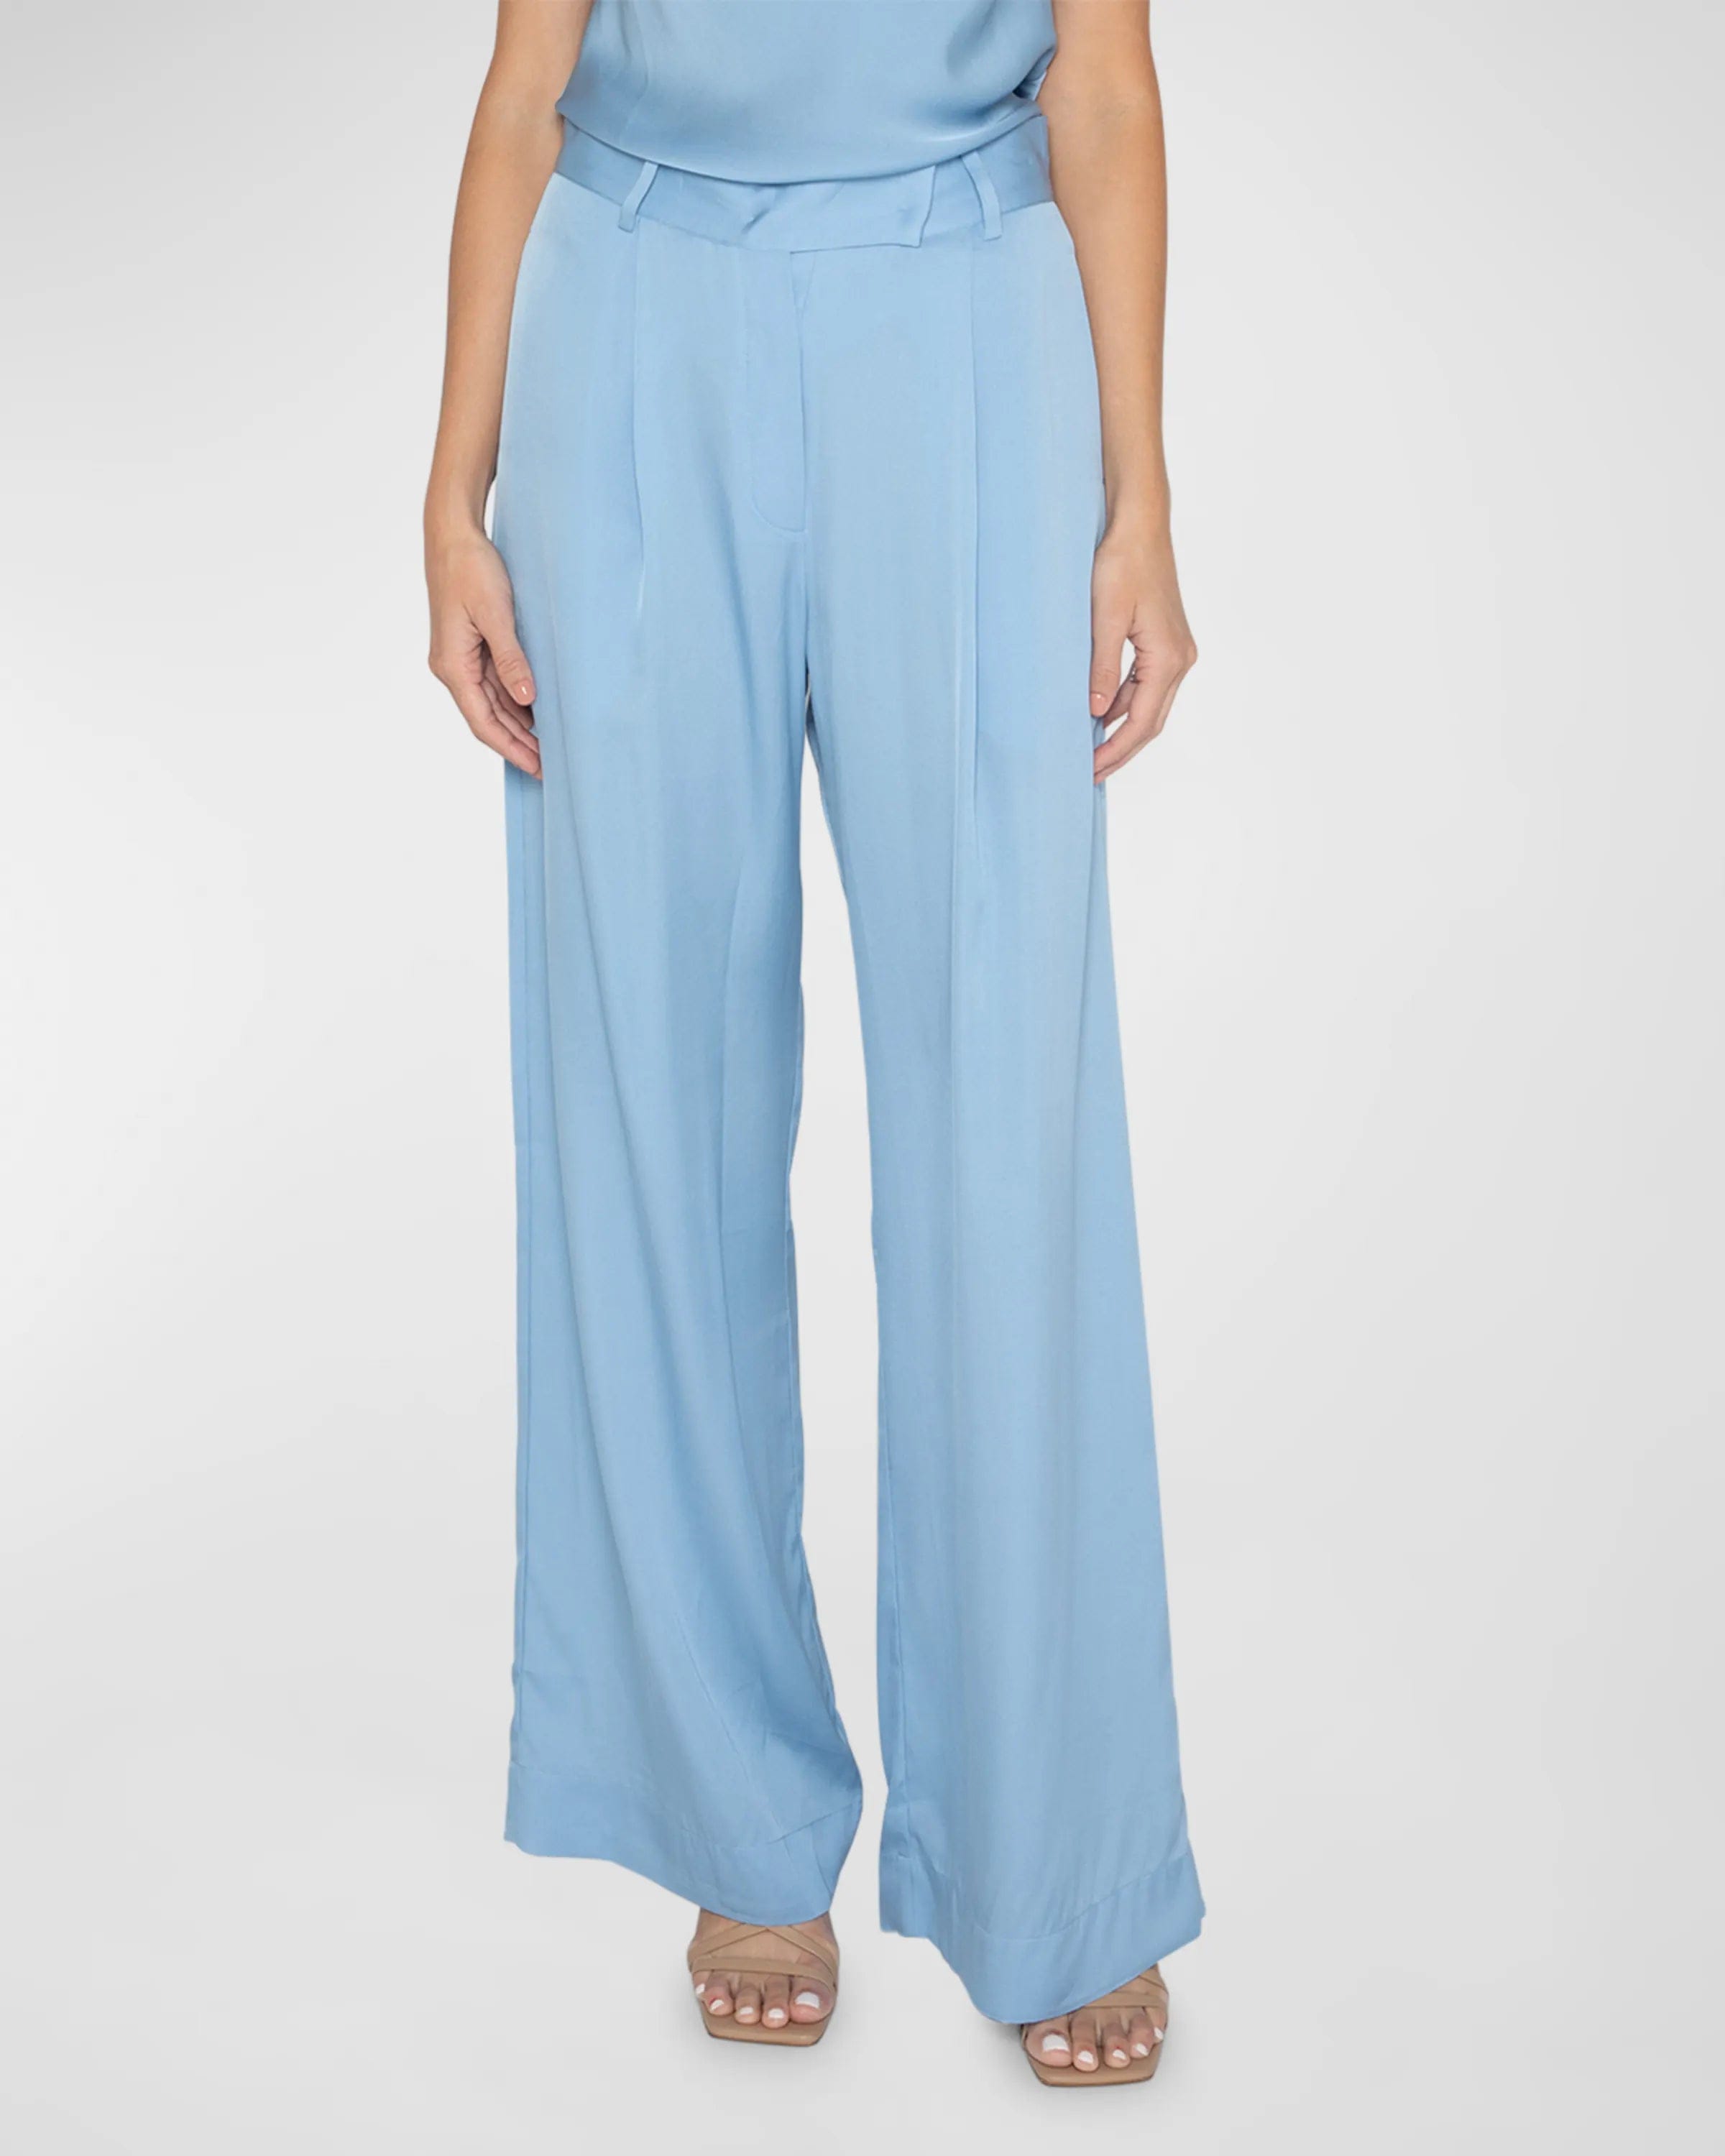 Adrianne Flare Pants - 2 colors to choose from